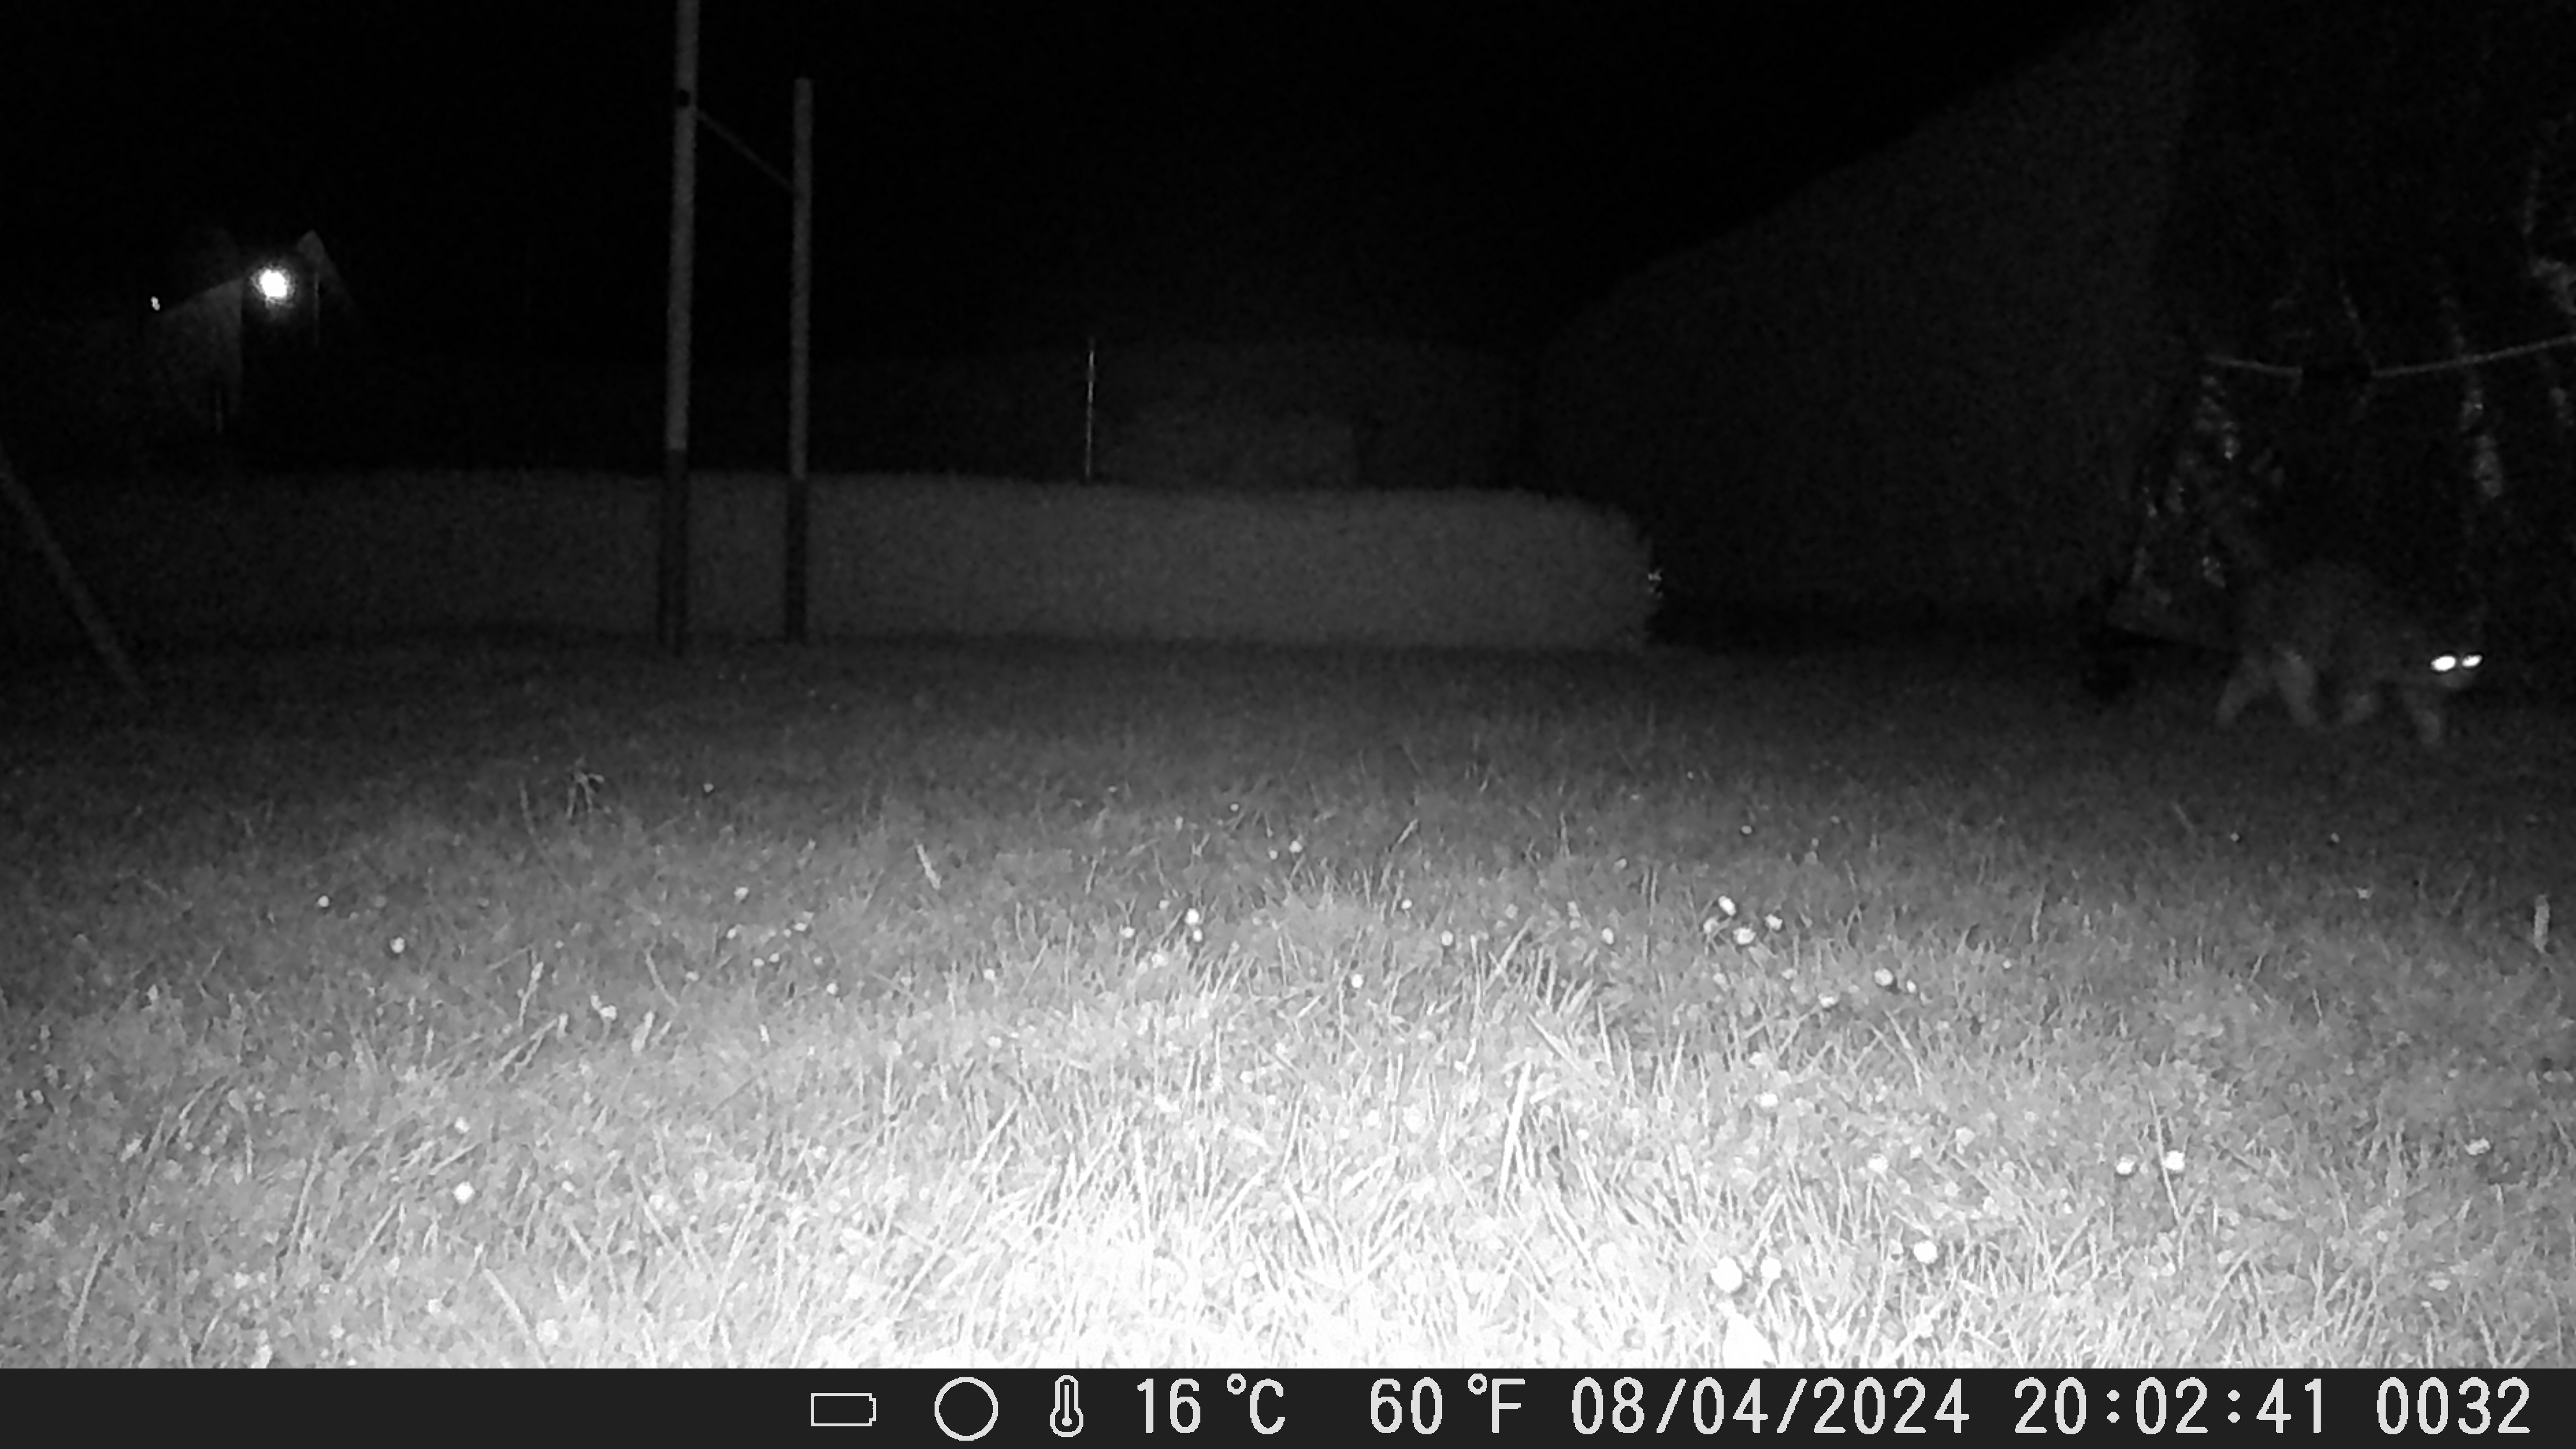 My question about the night shot, unfortunately nothing can be seen. Where is the mistake? The field ...